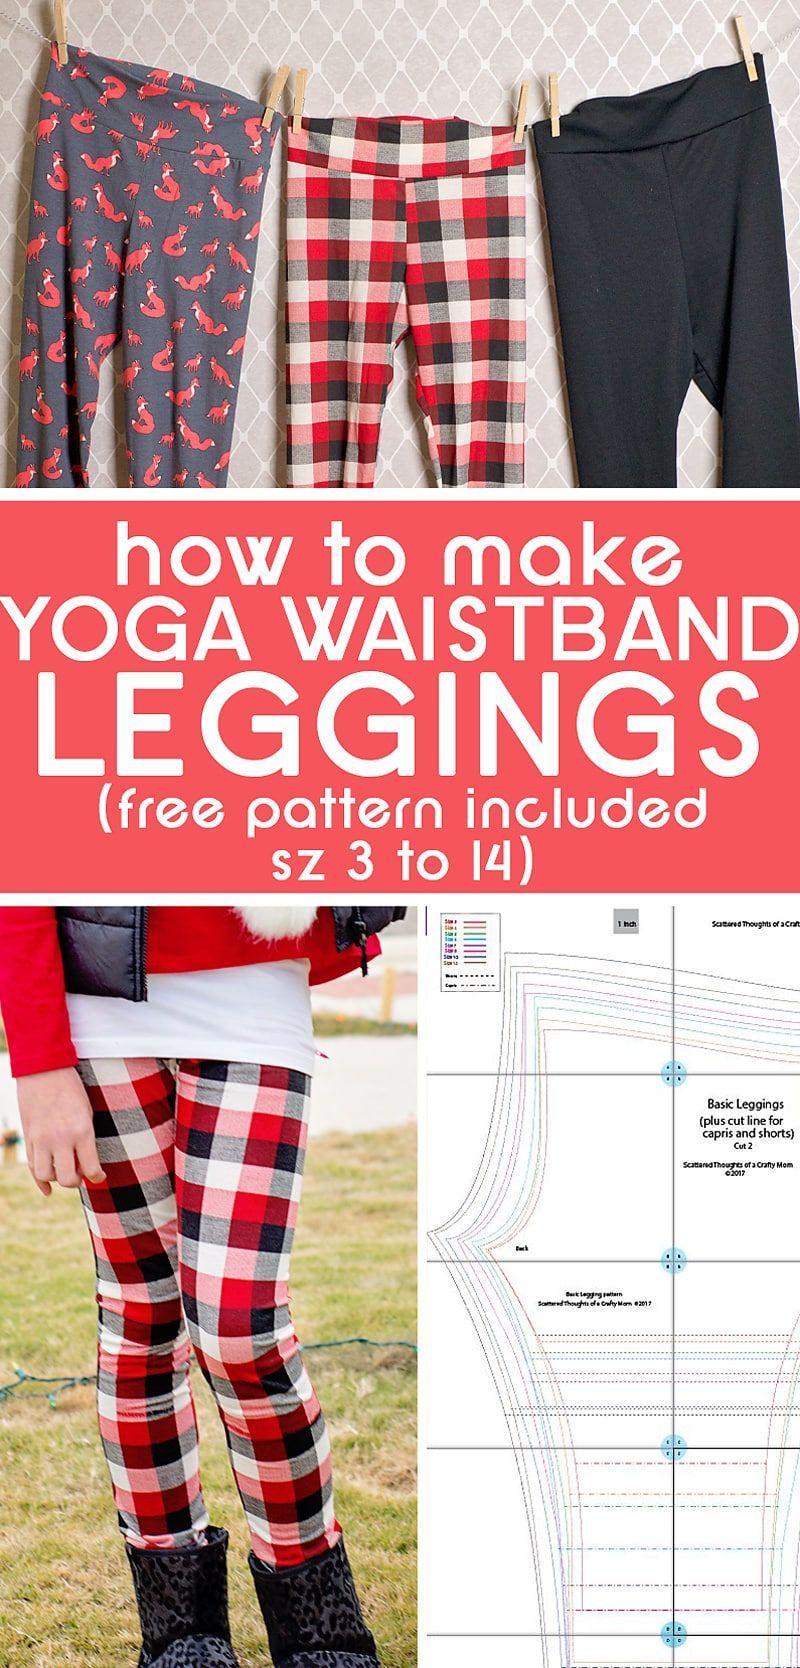 Yoga Waistband Leggings Tutorial (free pattern included) -   23 diy projects Clothes link
 ideas